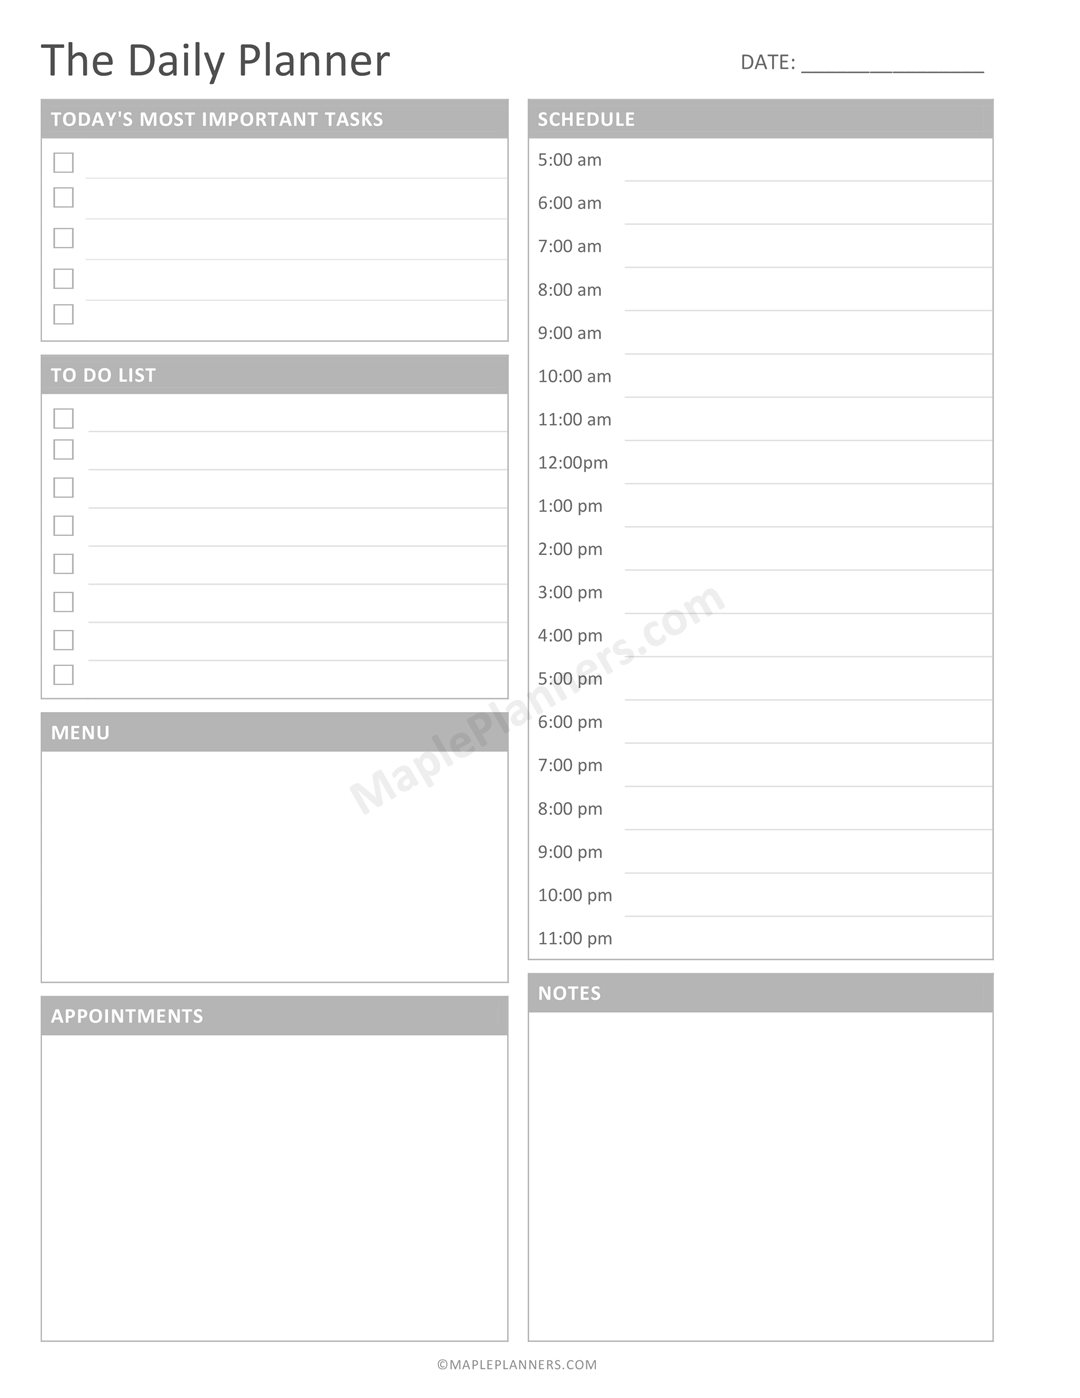 Ultimate planner page size guide (with printable reference cheat sheet)